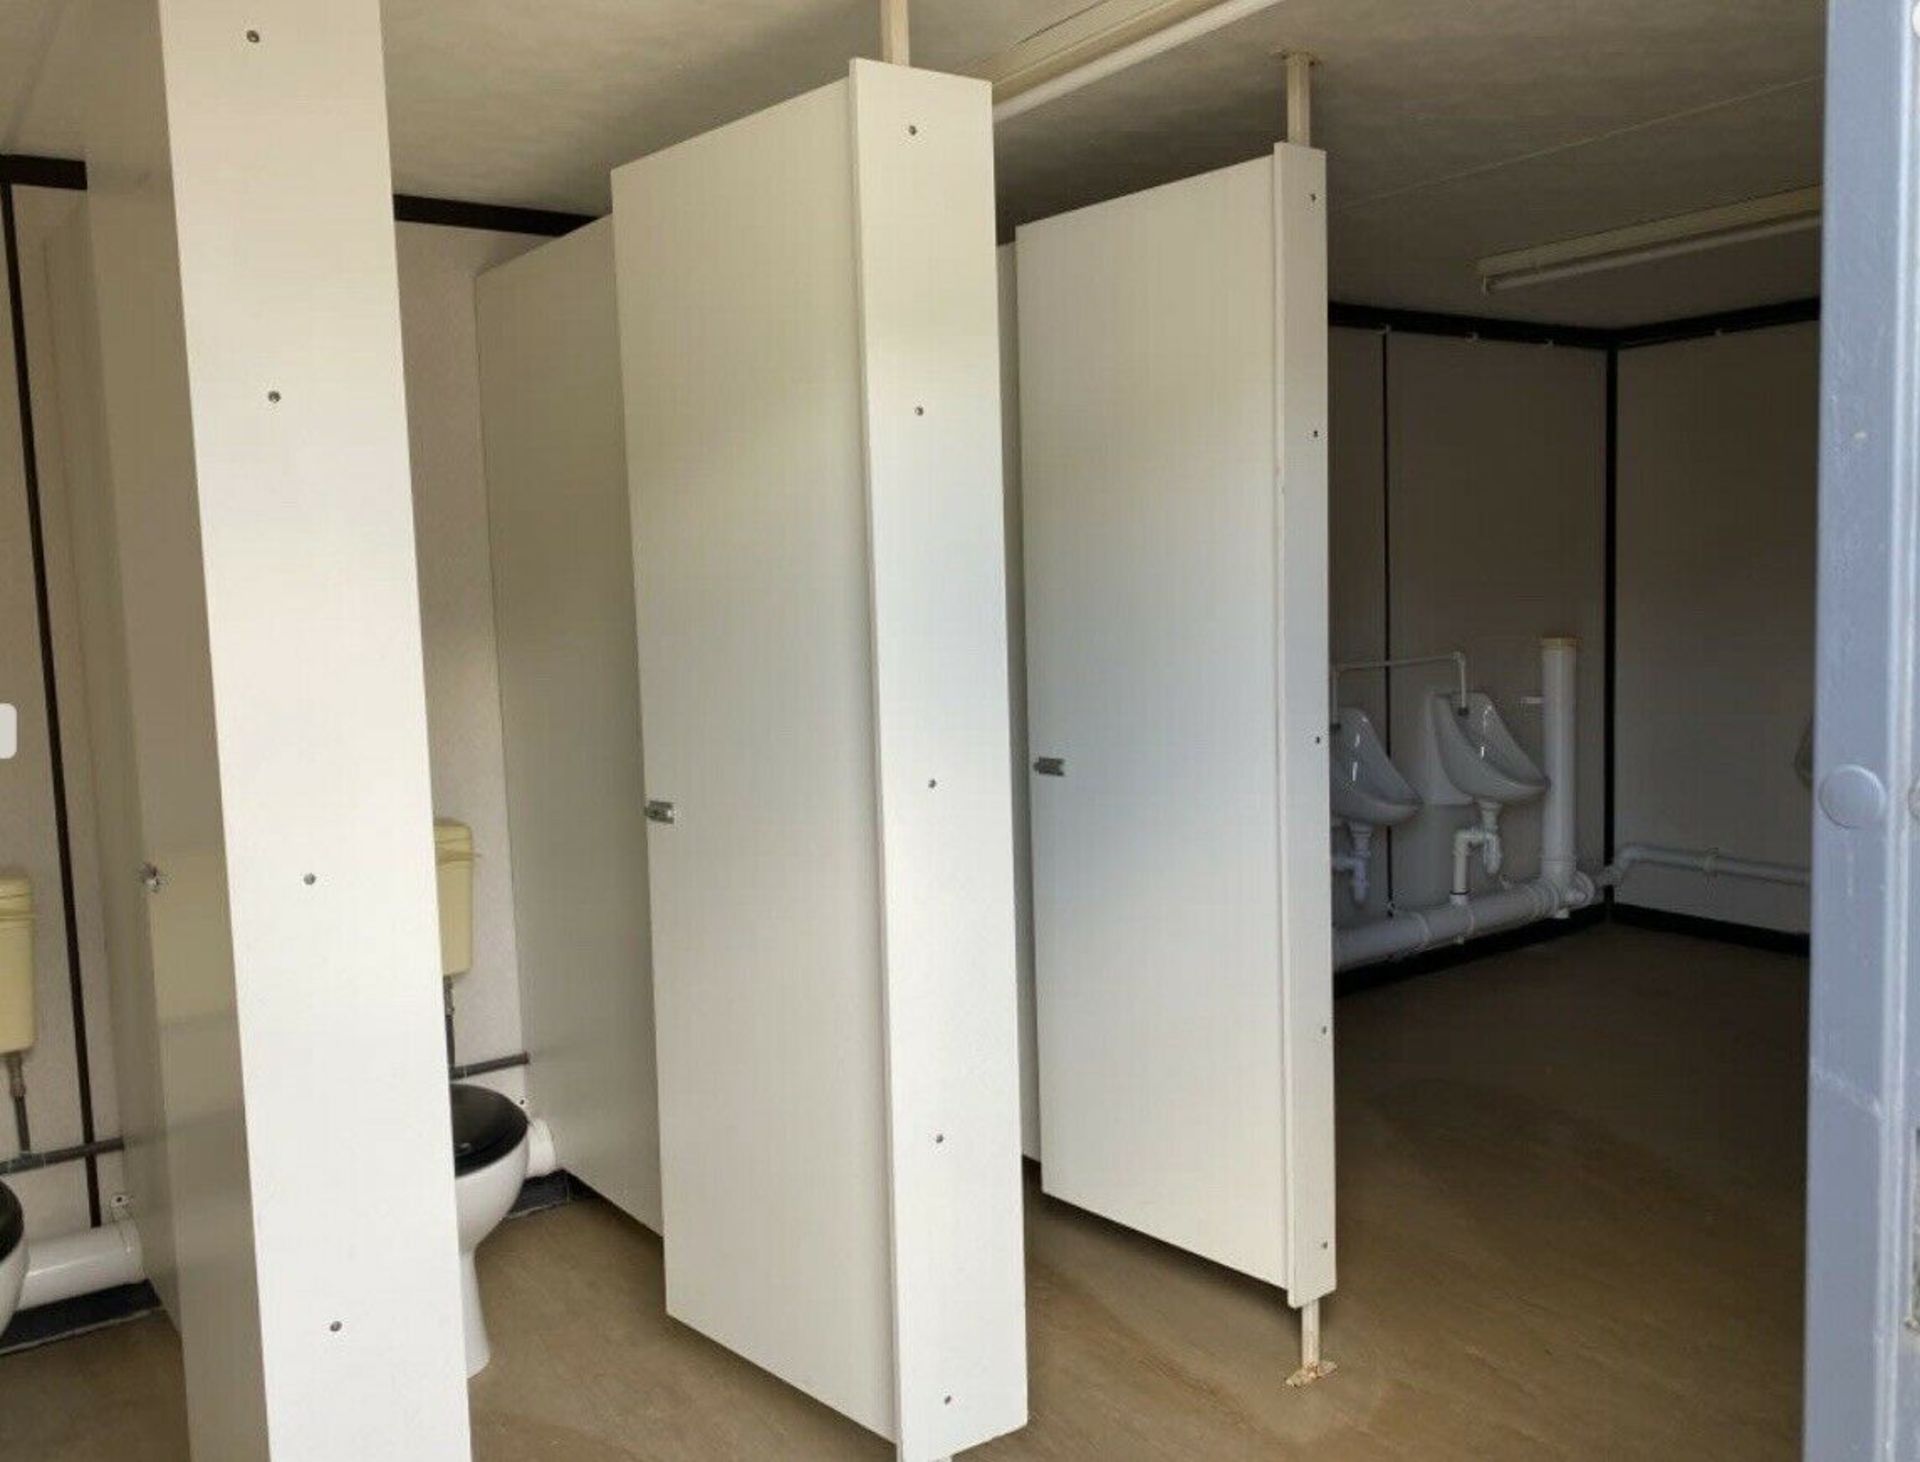 32ft X 10ft 5 + 3 Male And Female Toilet Block - Image 11 of 12